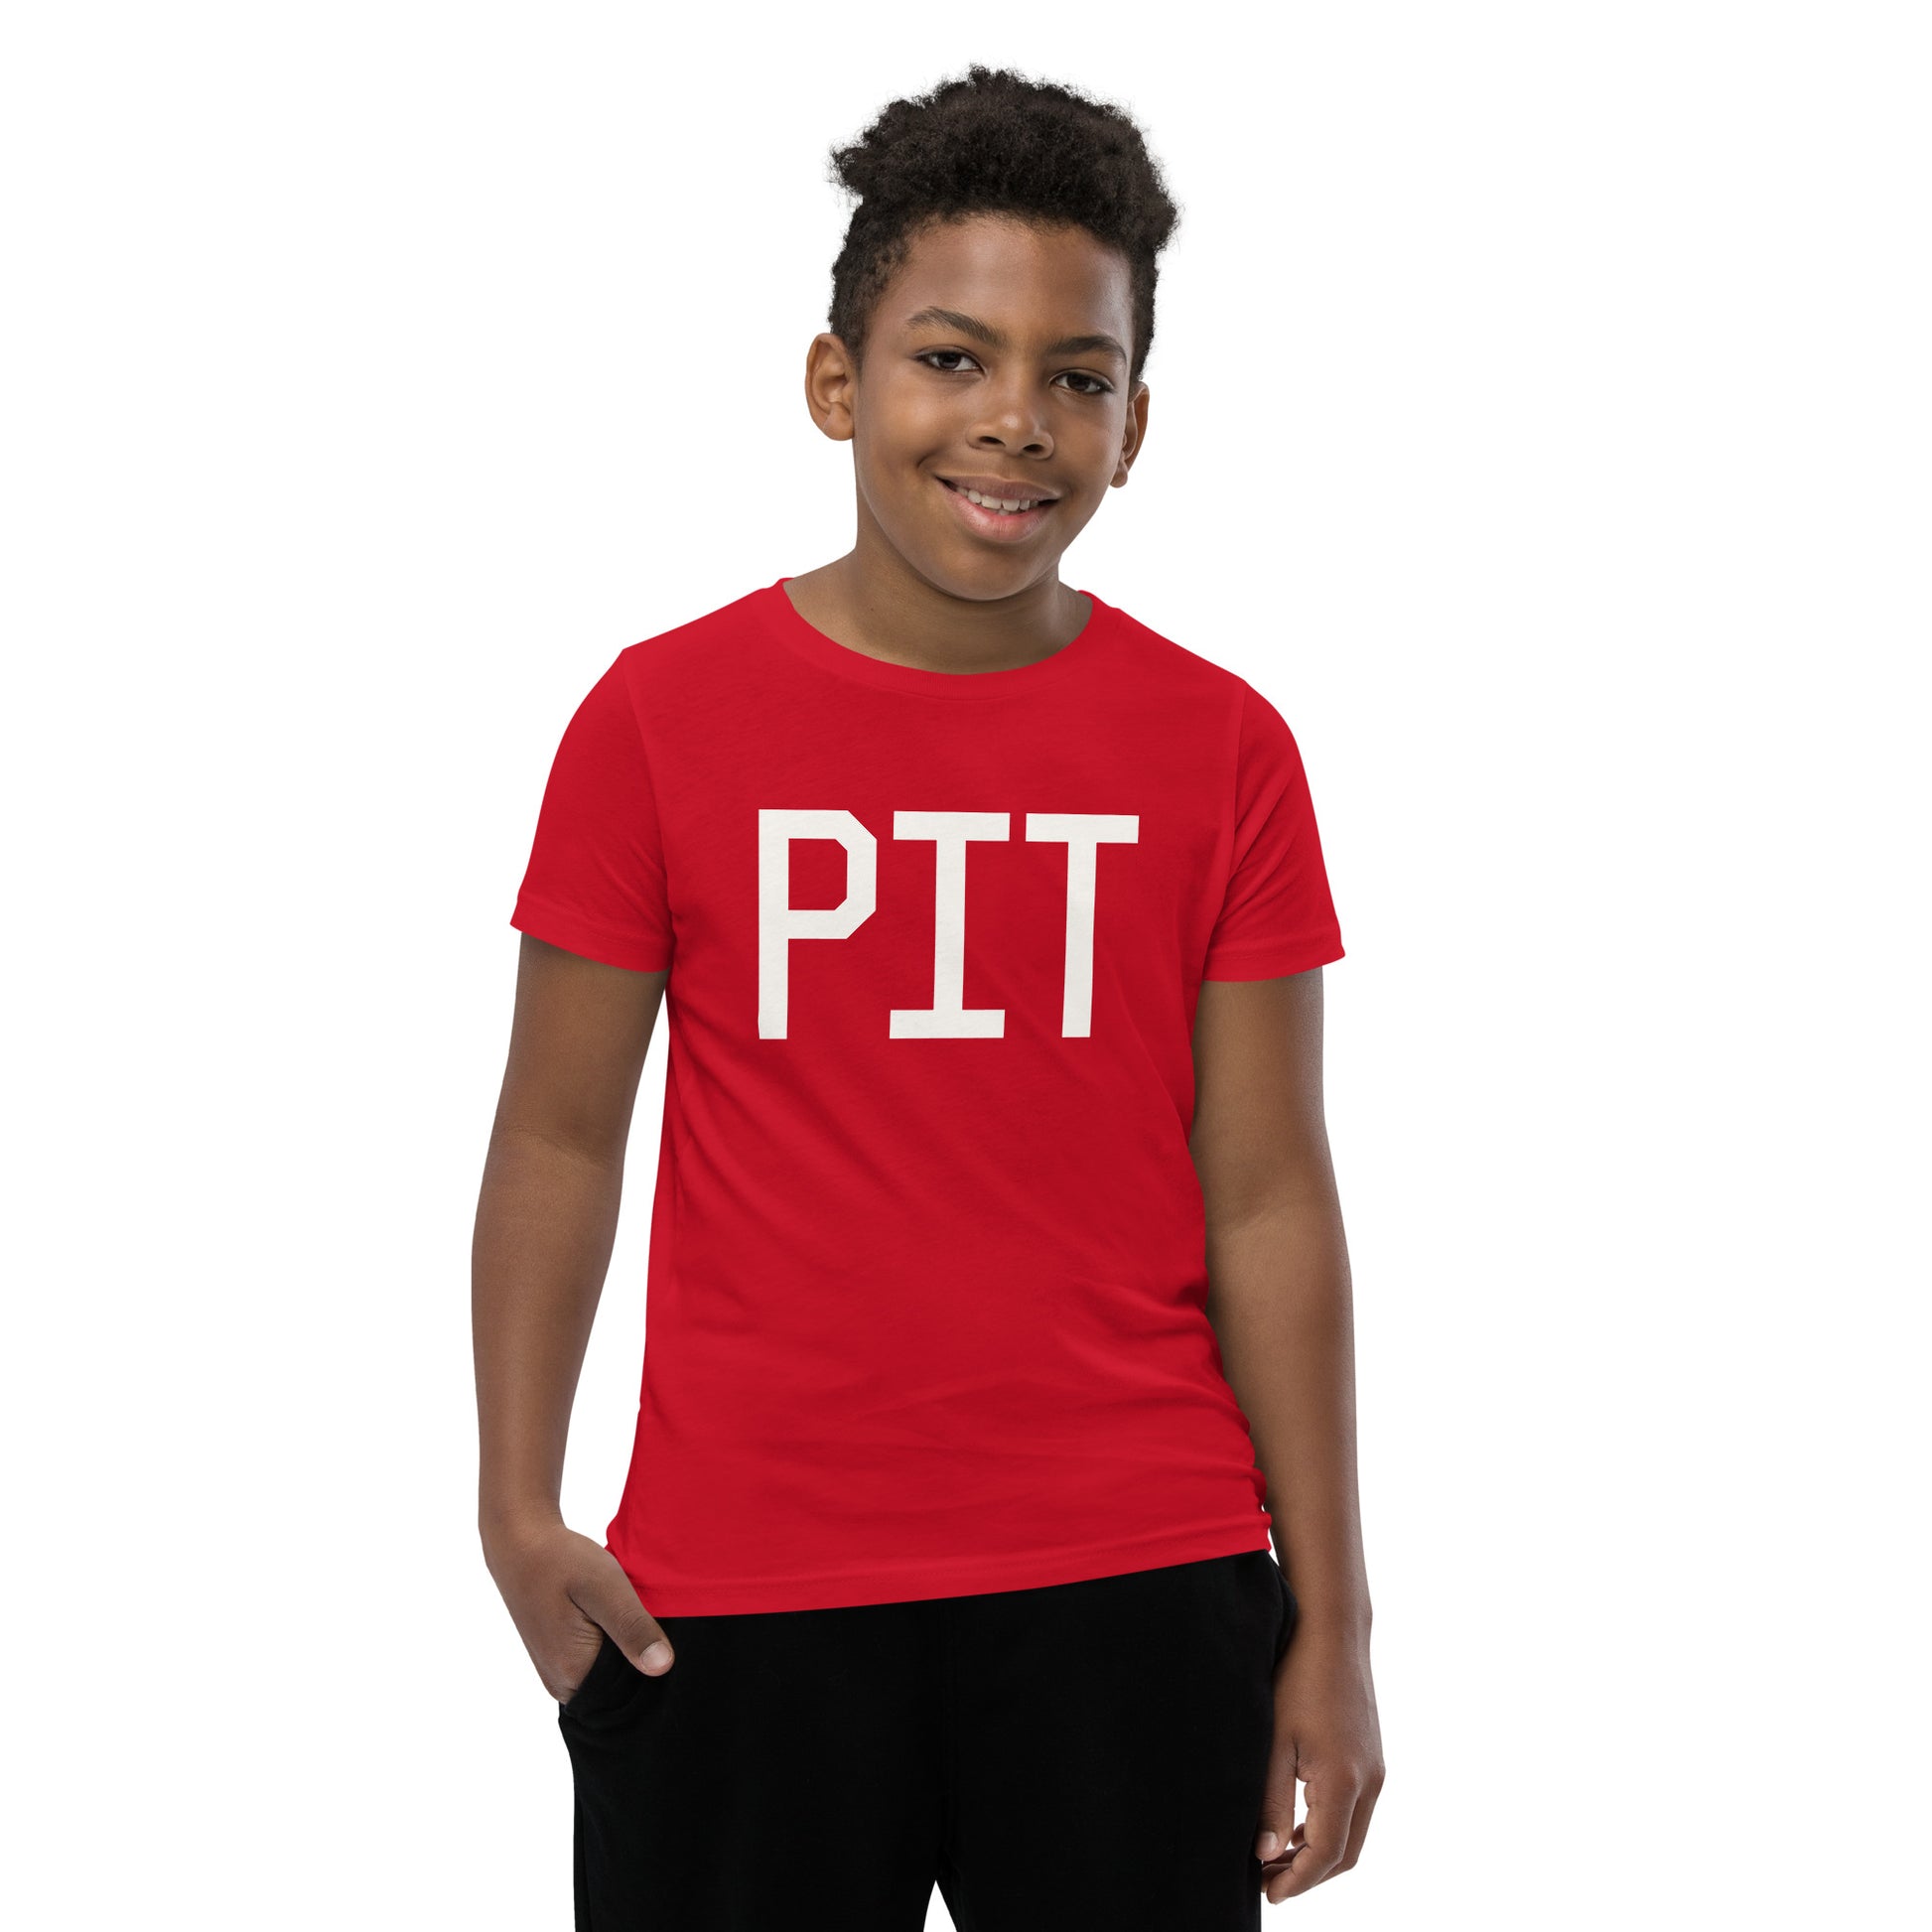 Kid's T-Shirt - White Graphic • PIT Pittsburgh • YHM Designs - Image 09